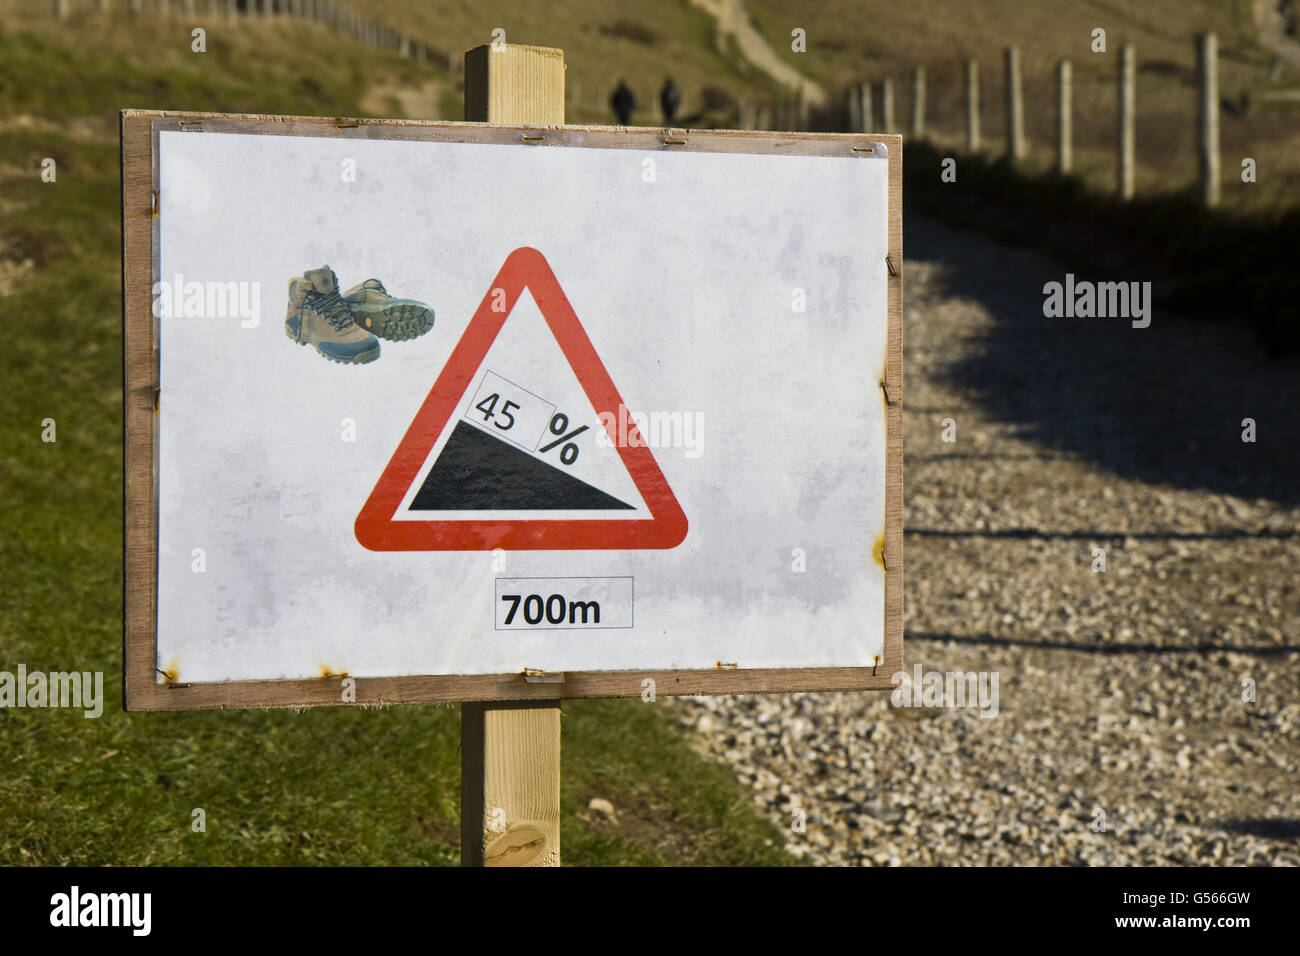 Sign on coastal footpath warning of 45 degree gradient for walkers, near Durdle Door, Dorset, England, January Stock Photo